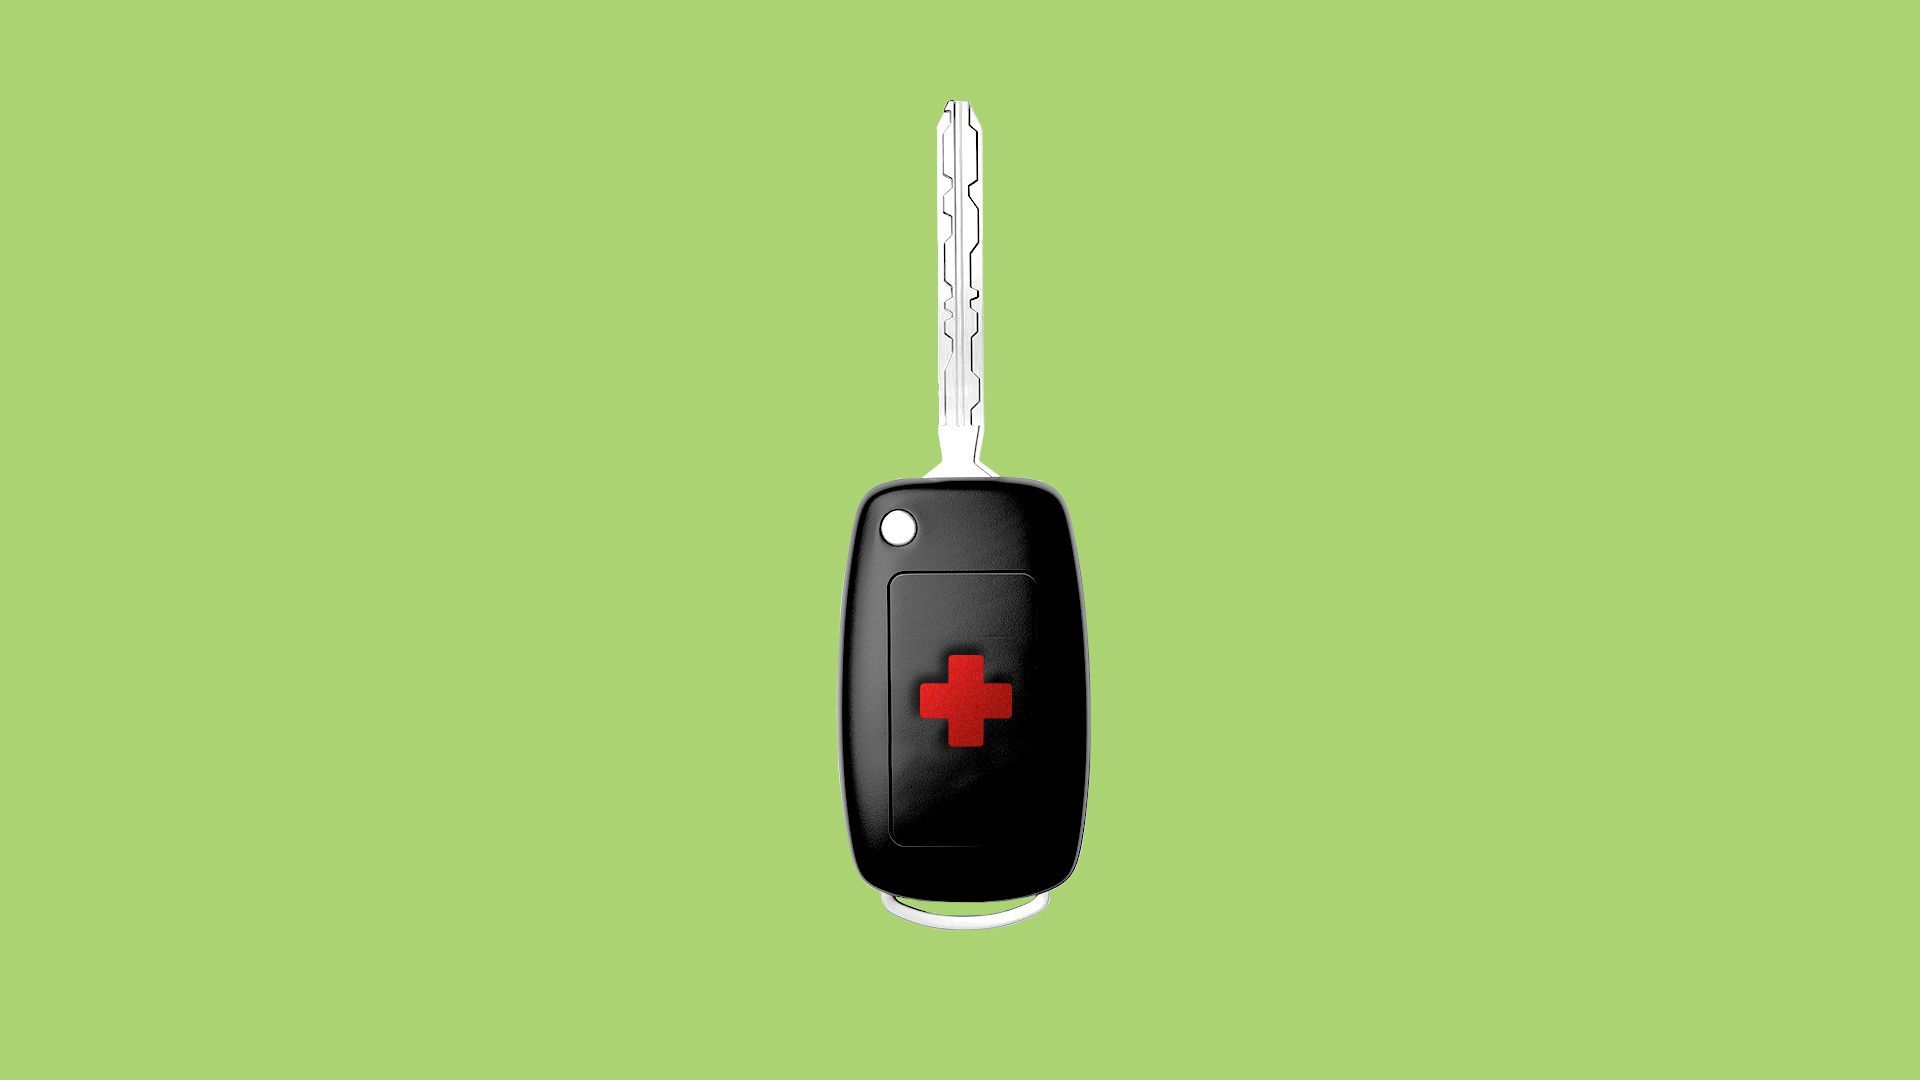 Illustration of a car key with a health plus on the unlock button